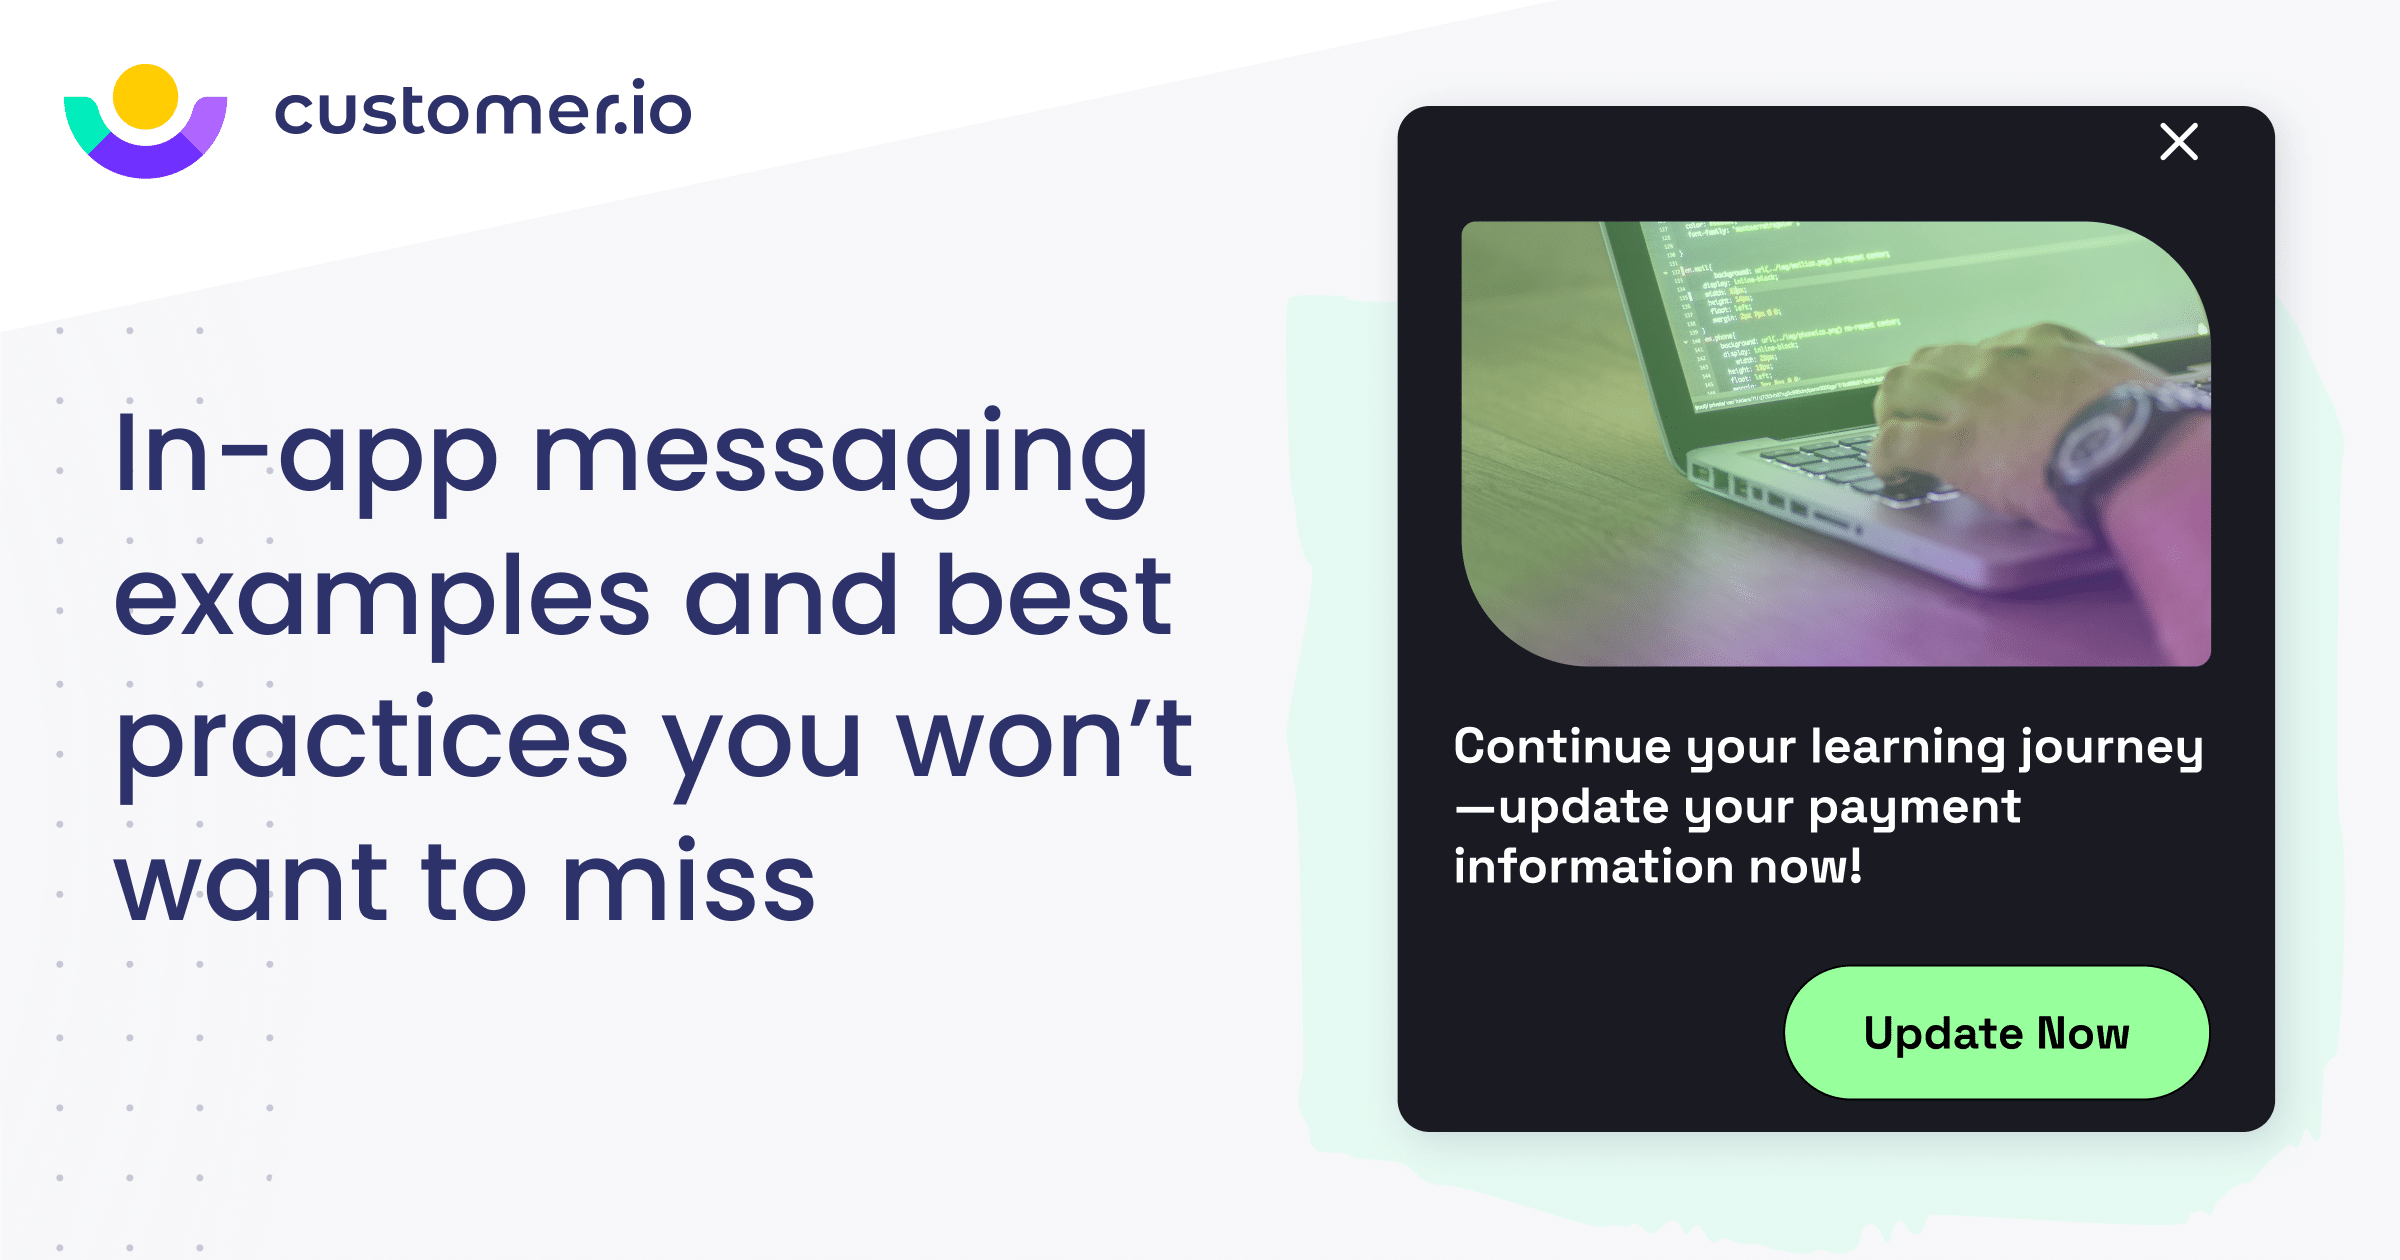 in-app messaging examples and best practices